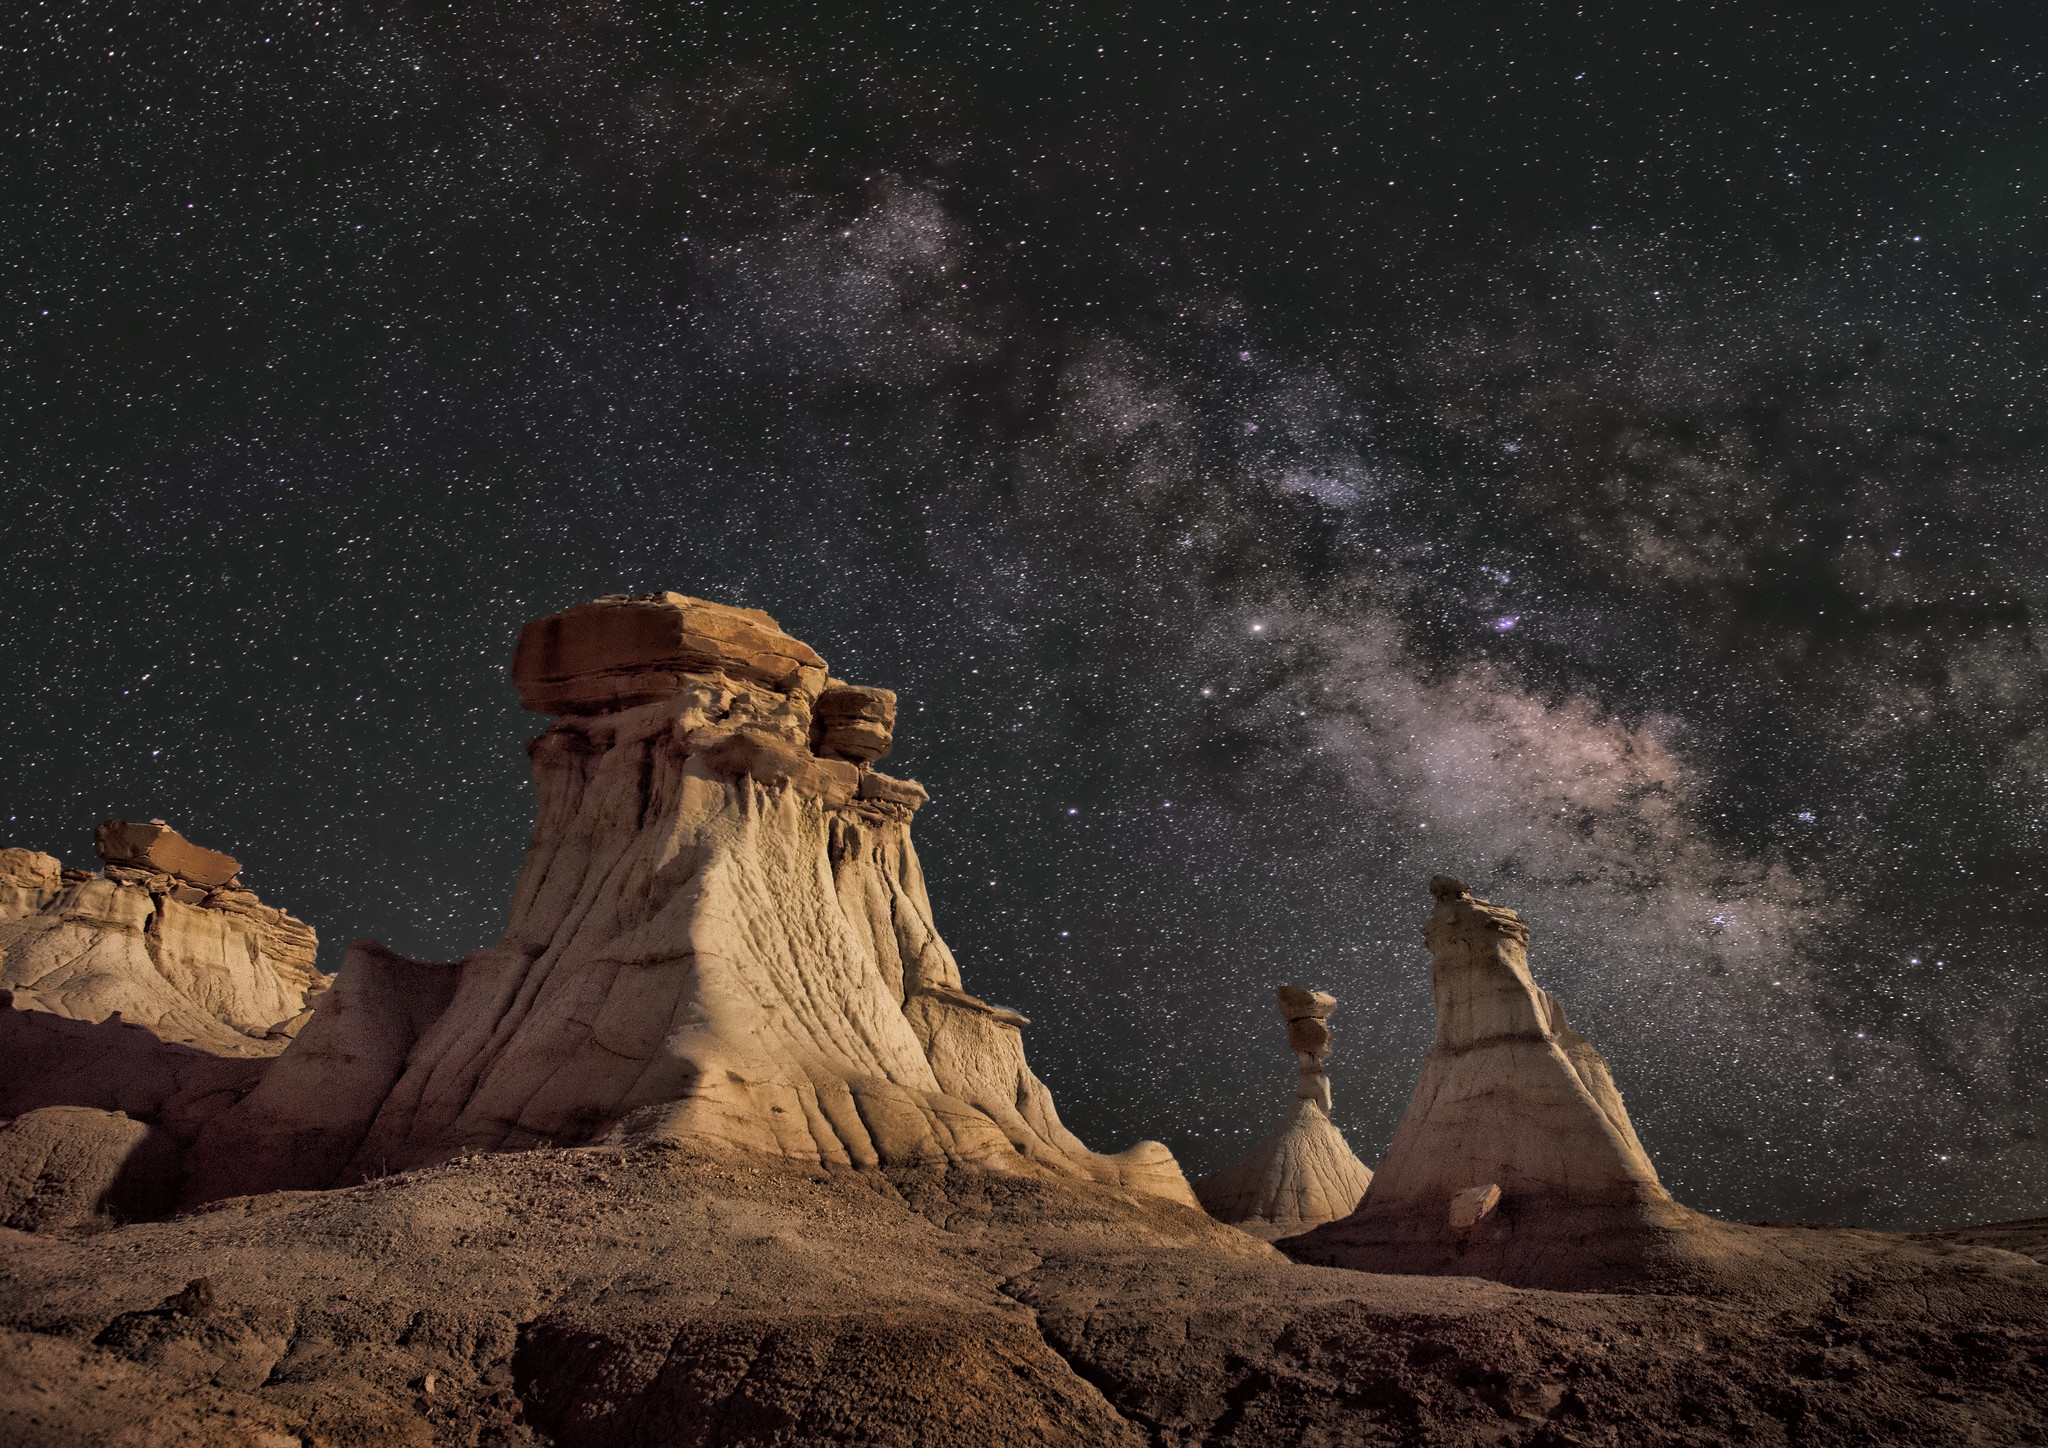 Chaco Canyon under the Milky Way. The beauty of this natural place eases the mind of the coronavirus in New Mexico.